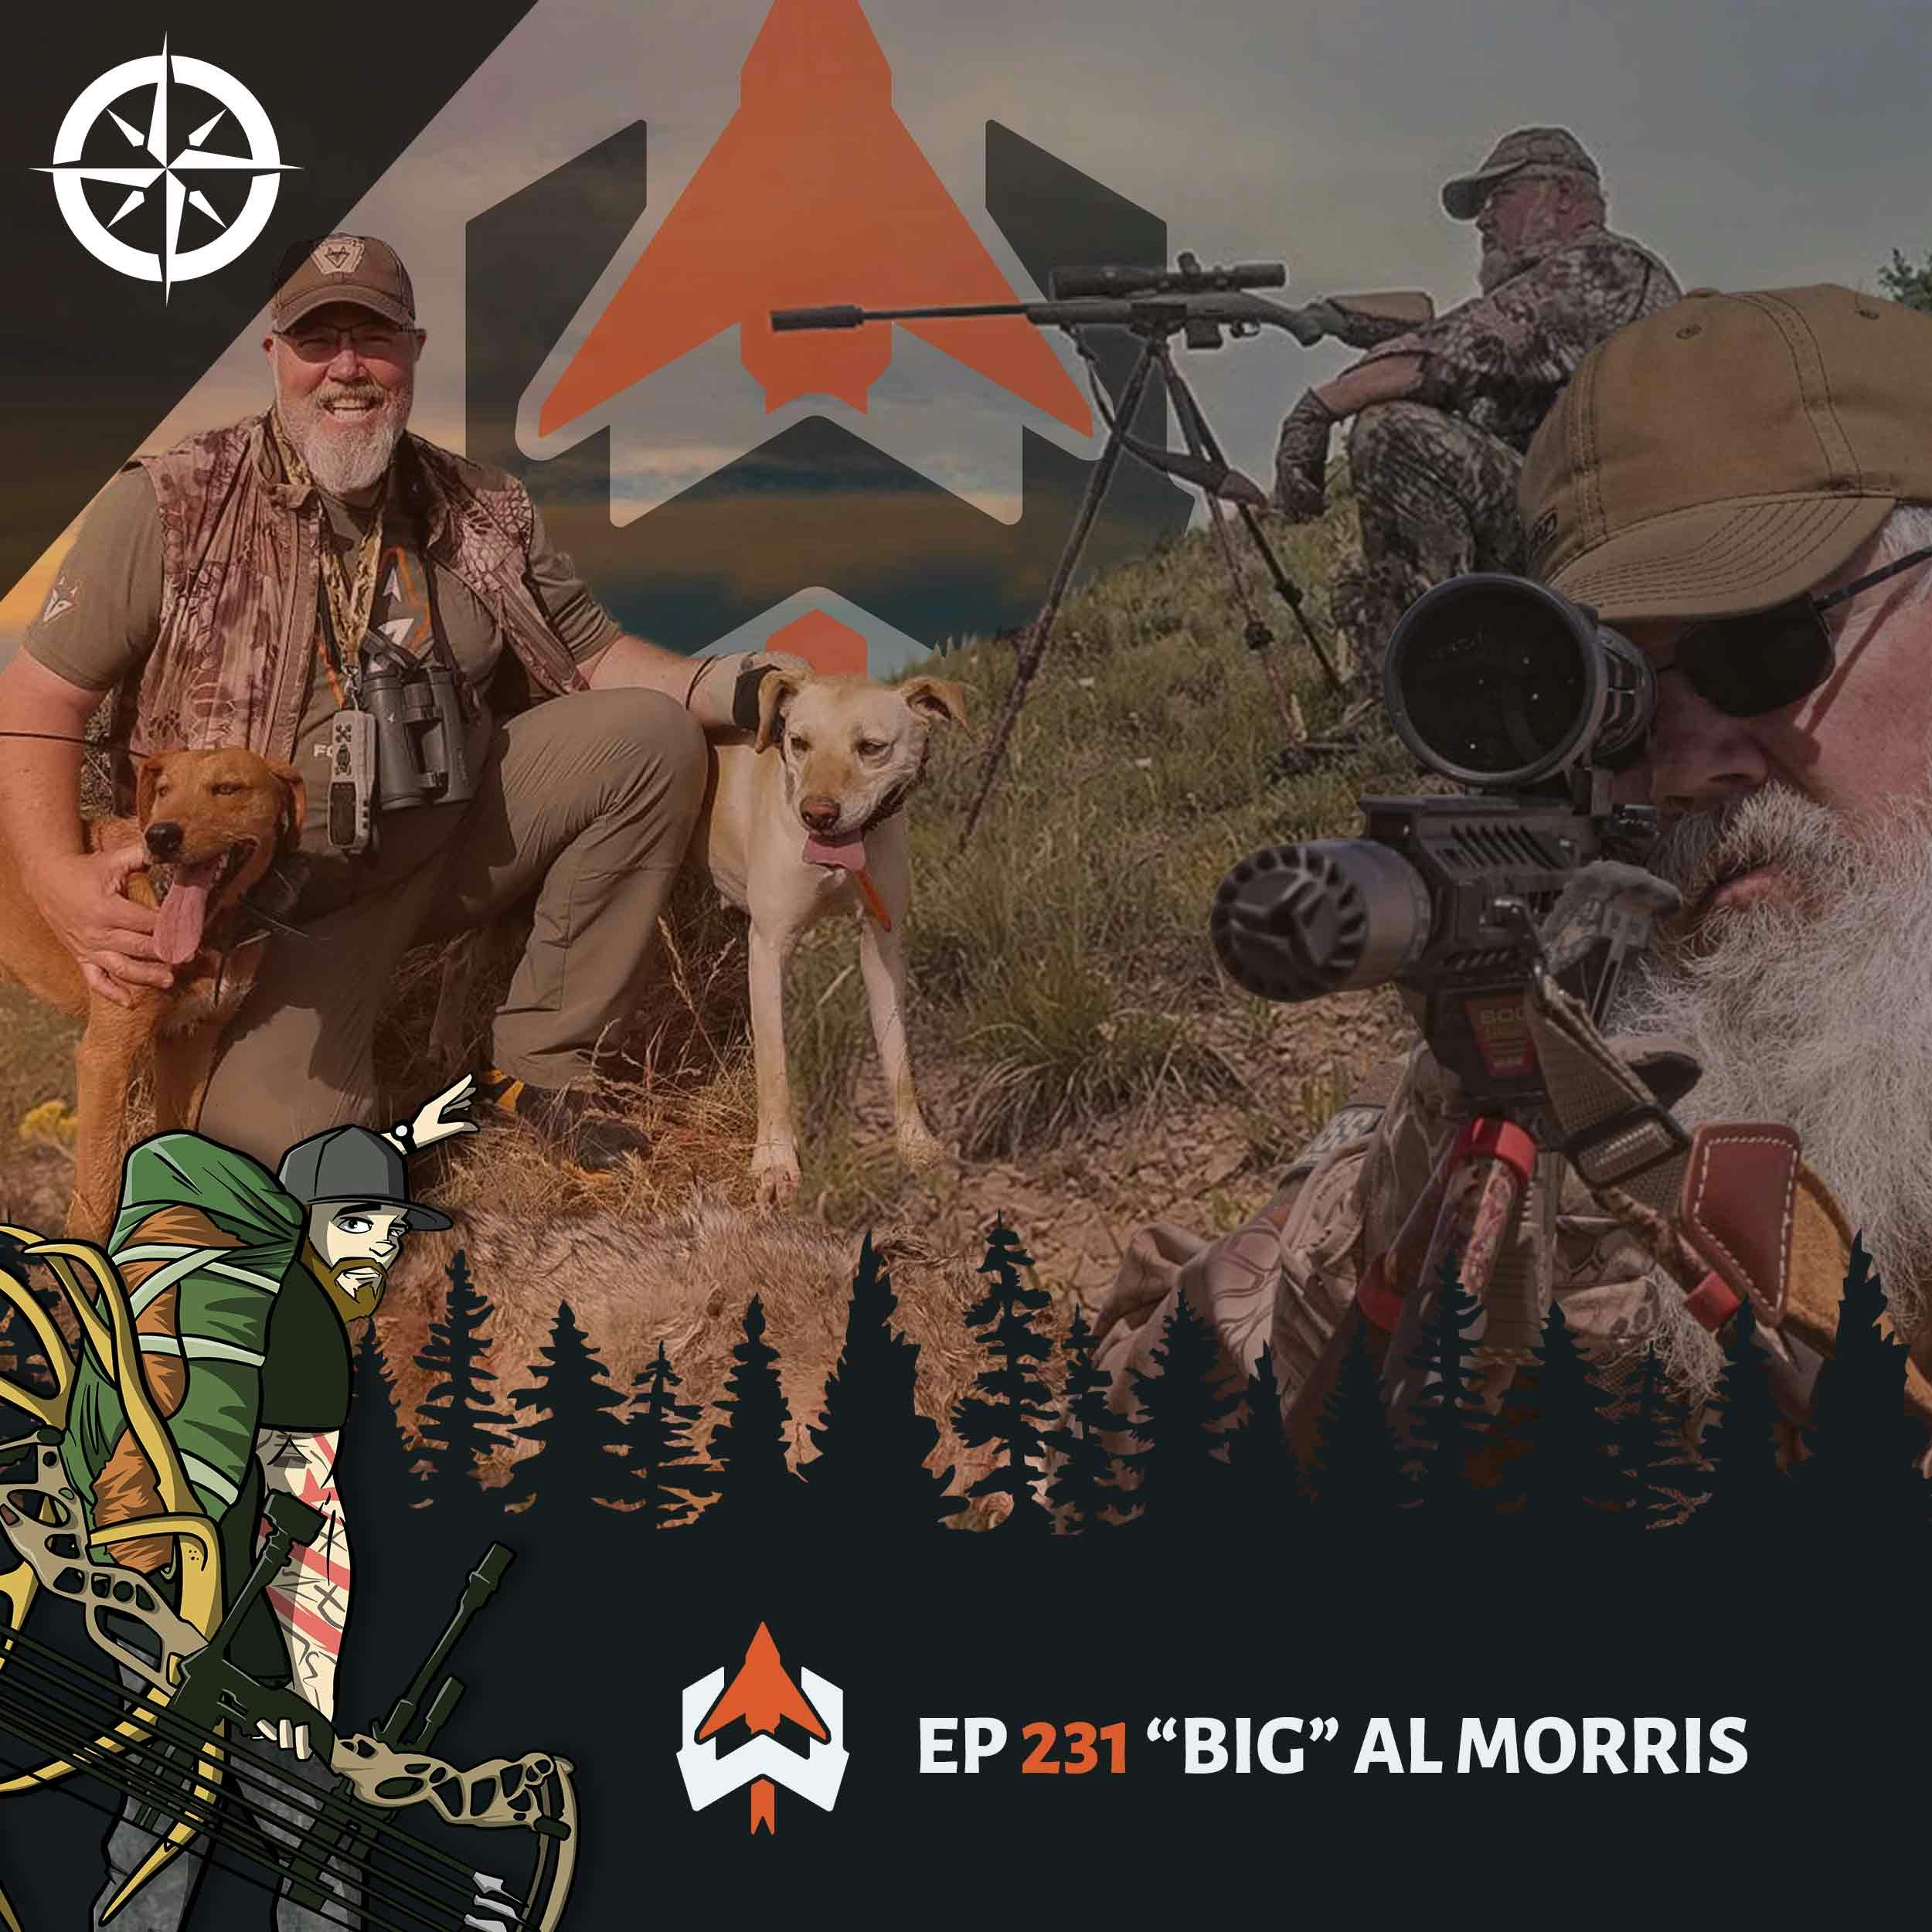 Ep 231 - “Big” Al Morris: Everything You Need to Know About Coyote Hunting